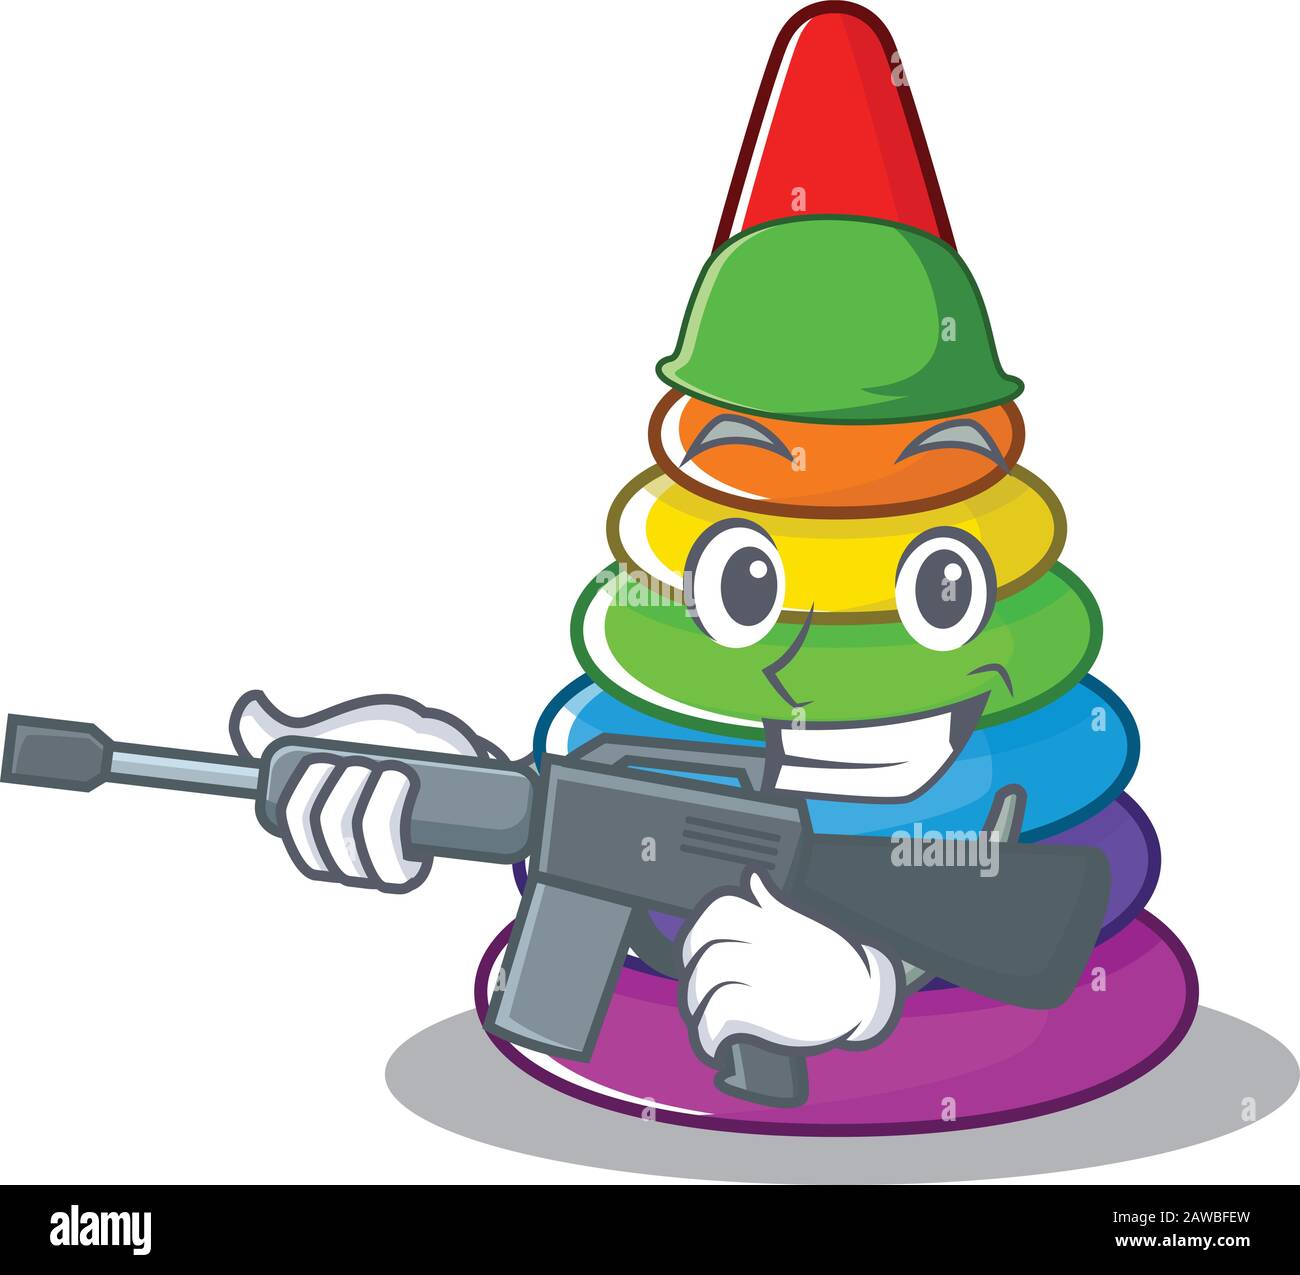 A cute picture of toy pyramid Army with machine gun Stock Vector